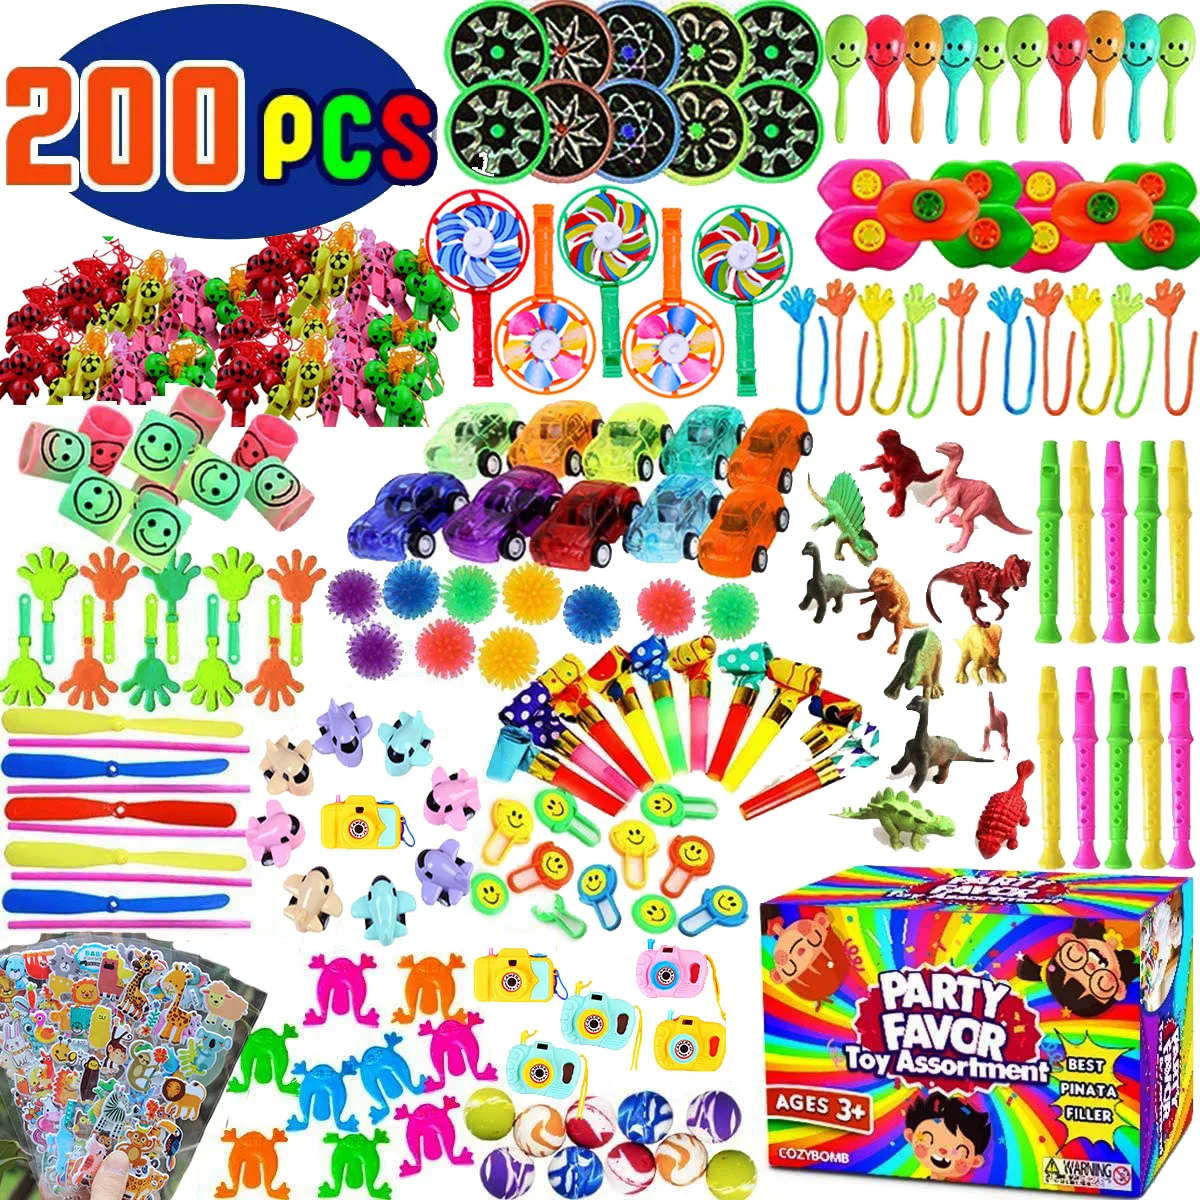 

200 Pcs Bulk Assortment Toys Party Favors for Kids Prizes - Best for Birthday Party Giveaways Pinata Easter Egg Fillers Toy